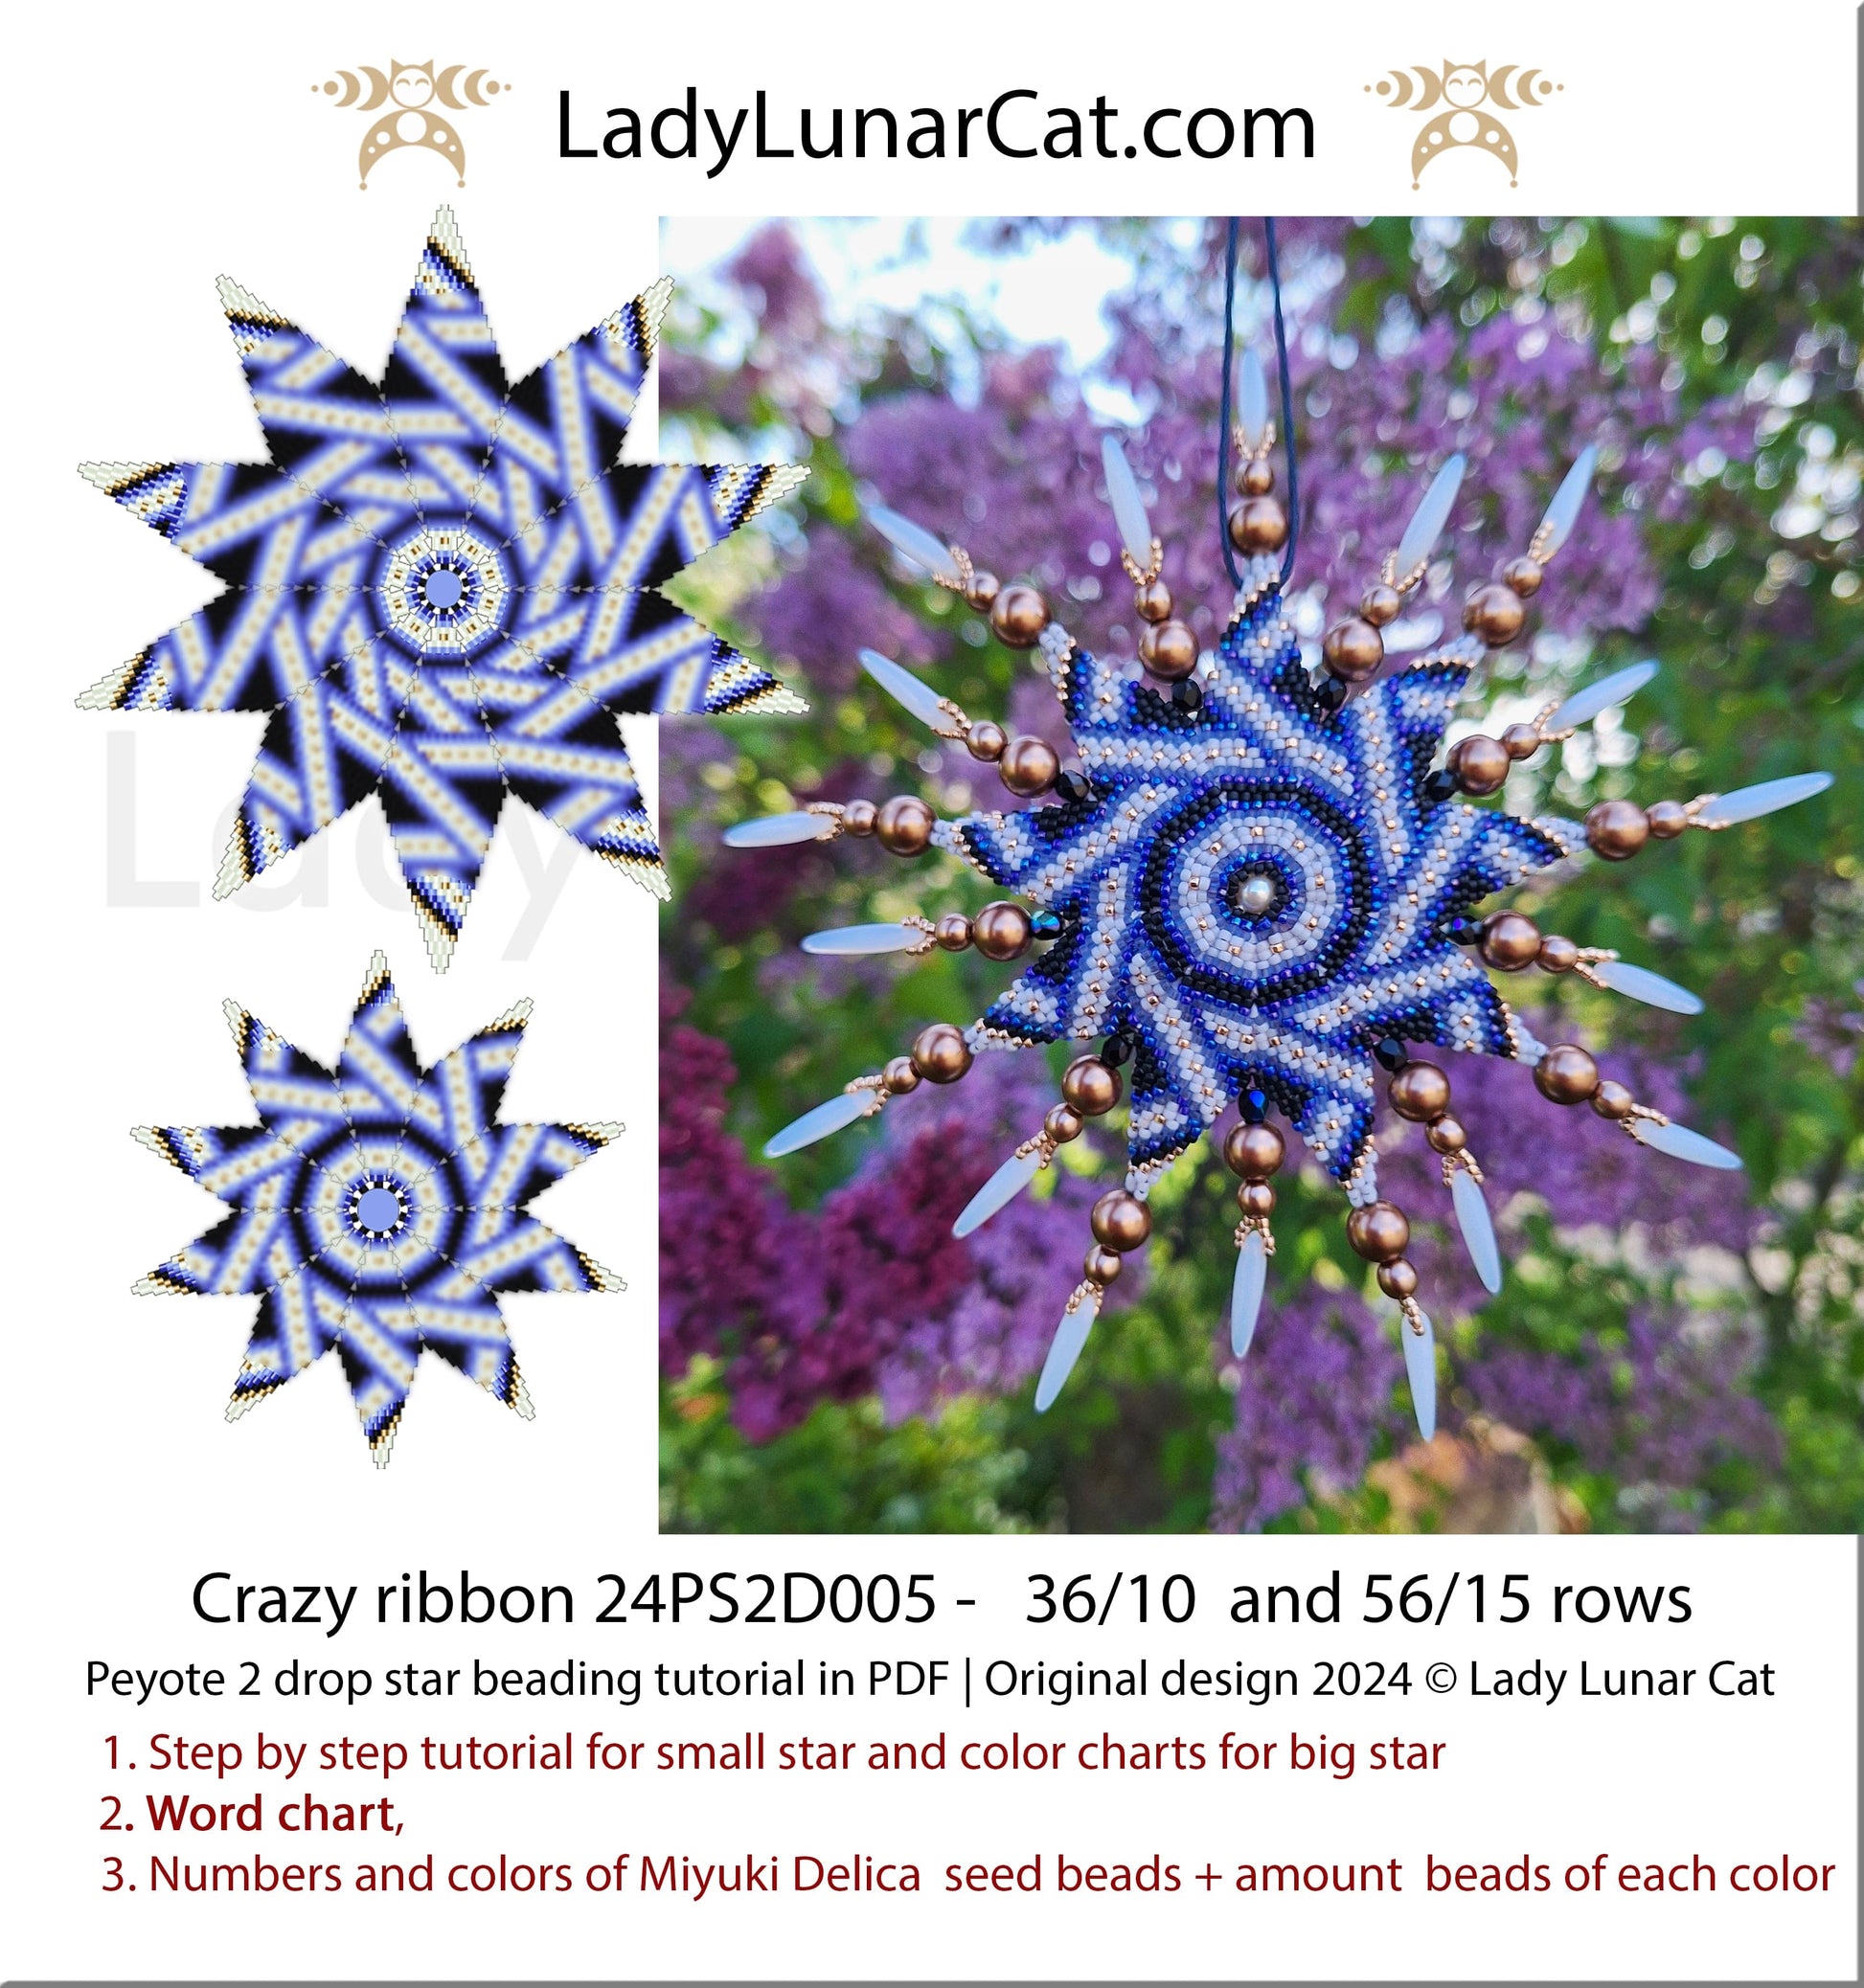 Peyote 2 drop star pattern for beading - Crazy Ribbon  56/15 rows and 36/ 10 rows LadyLunarCat